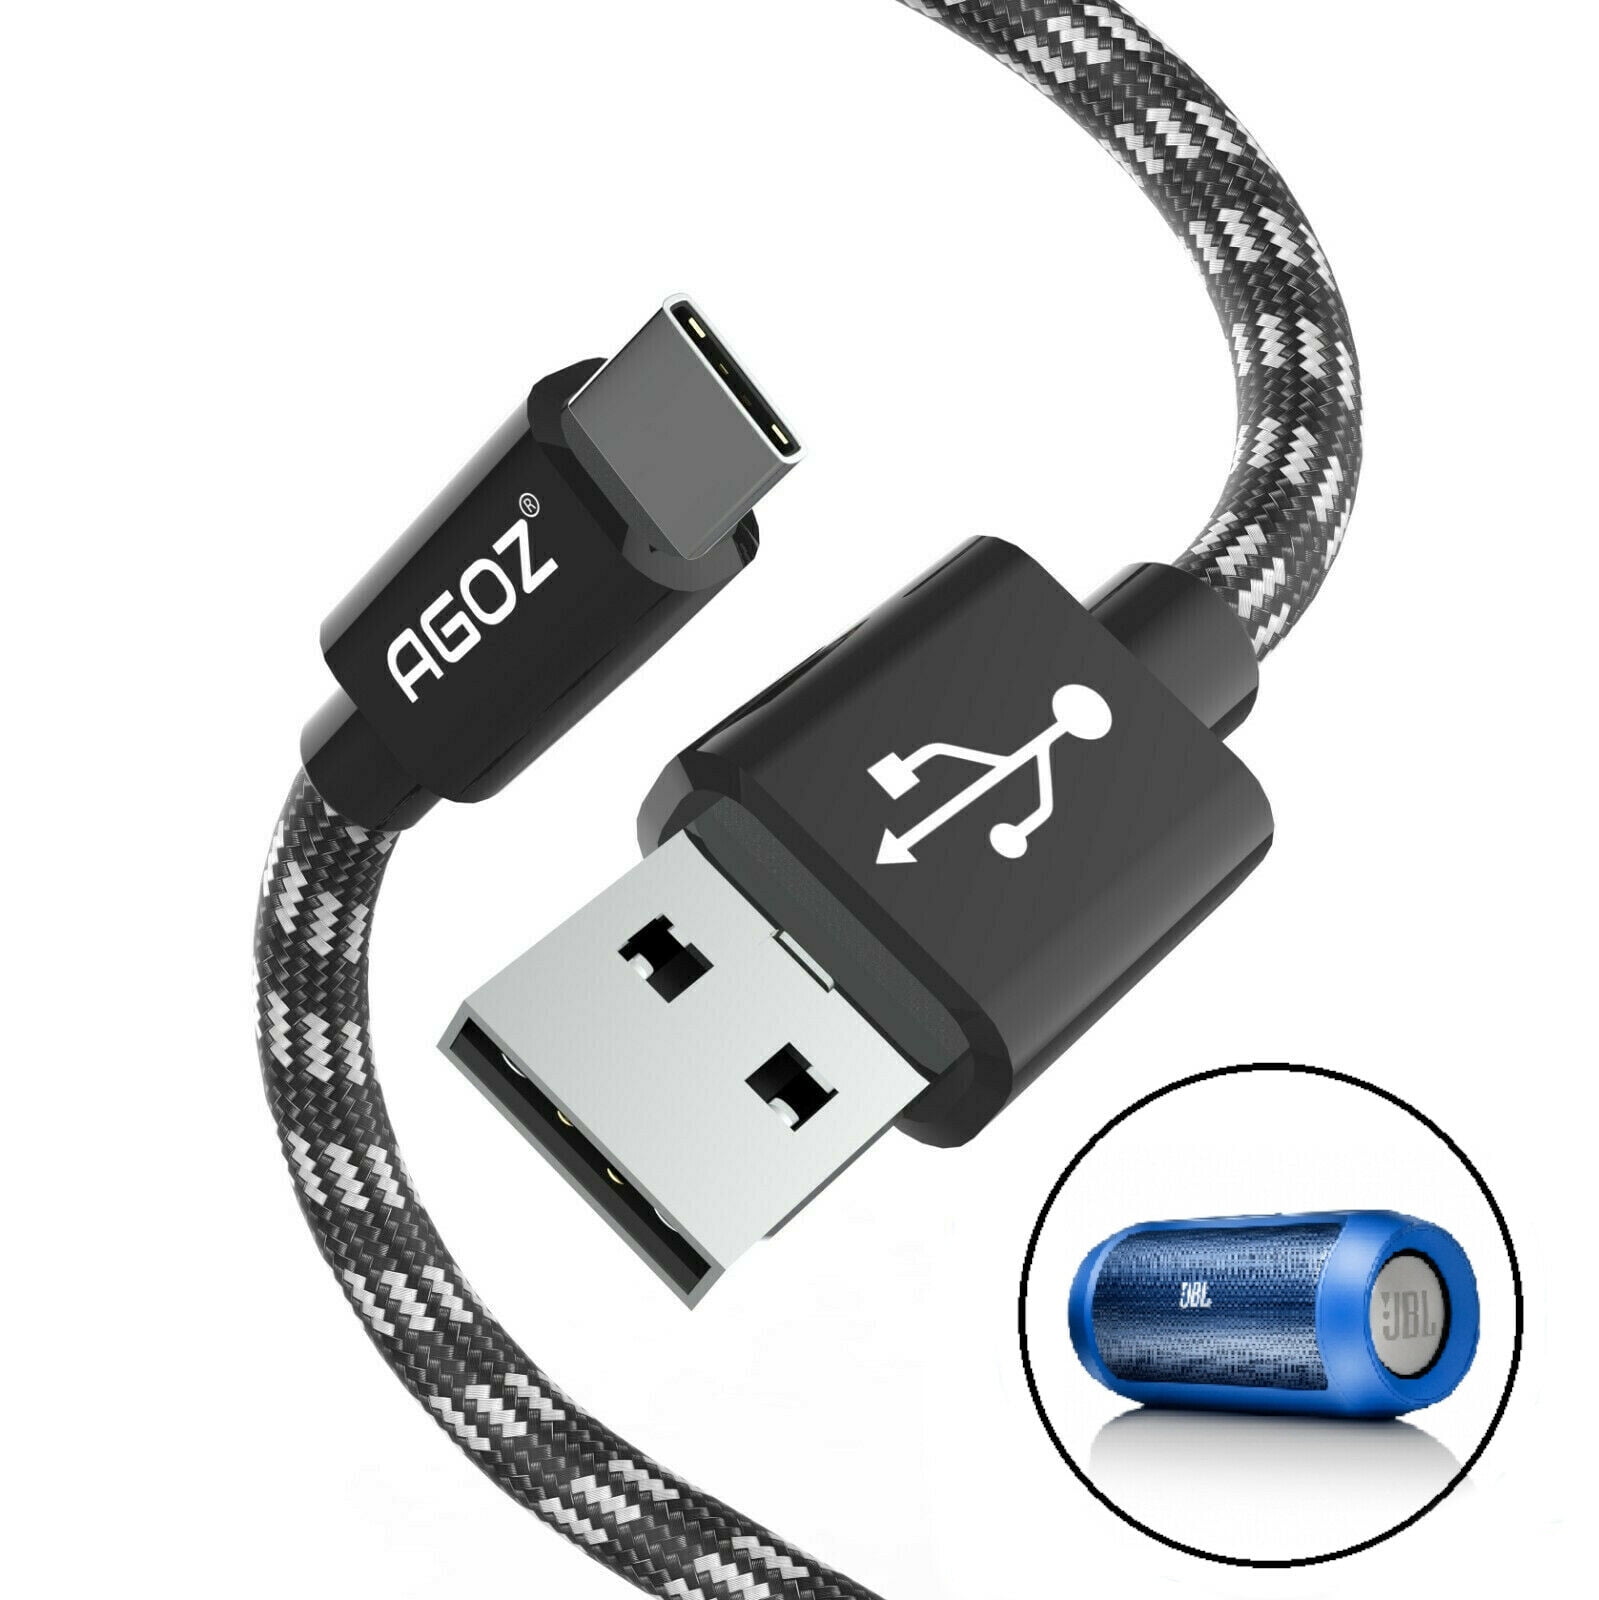 Tek Styz PRO OTG Power Cable Works for LG Pulse with Power Connect Any Compatible USB Accessory with MicroUSB Cable!